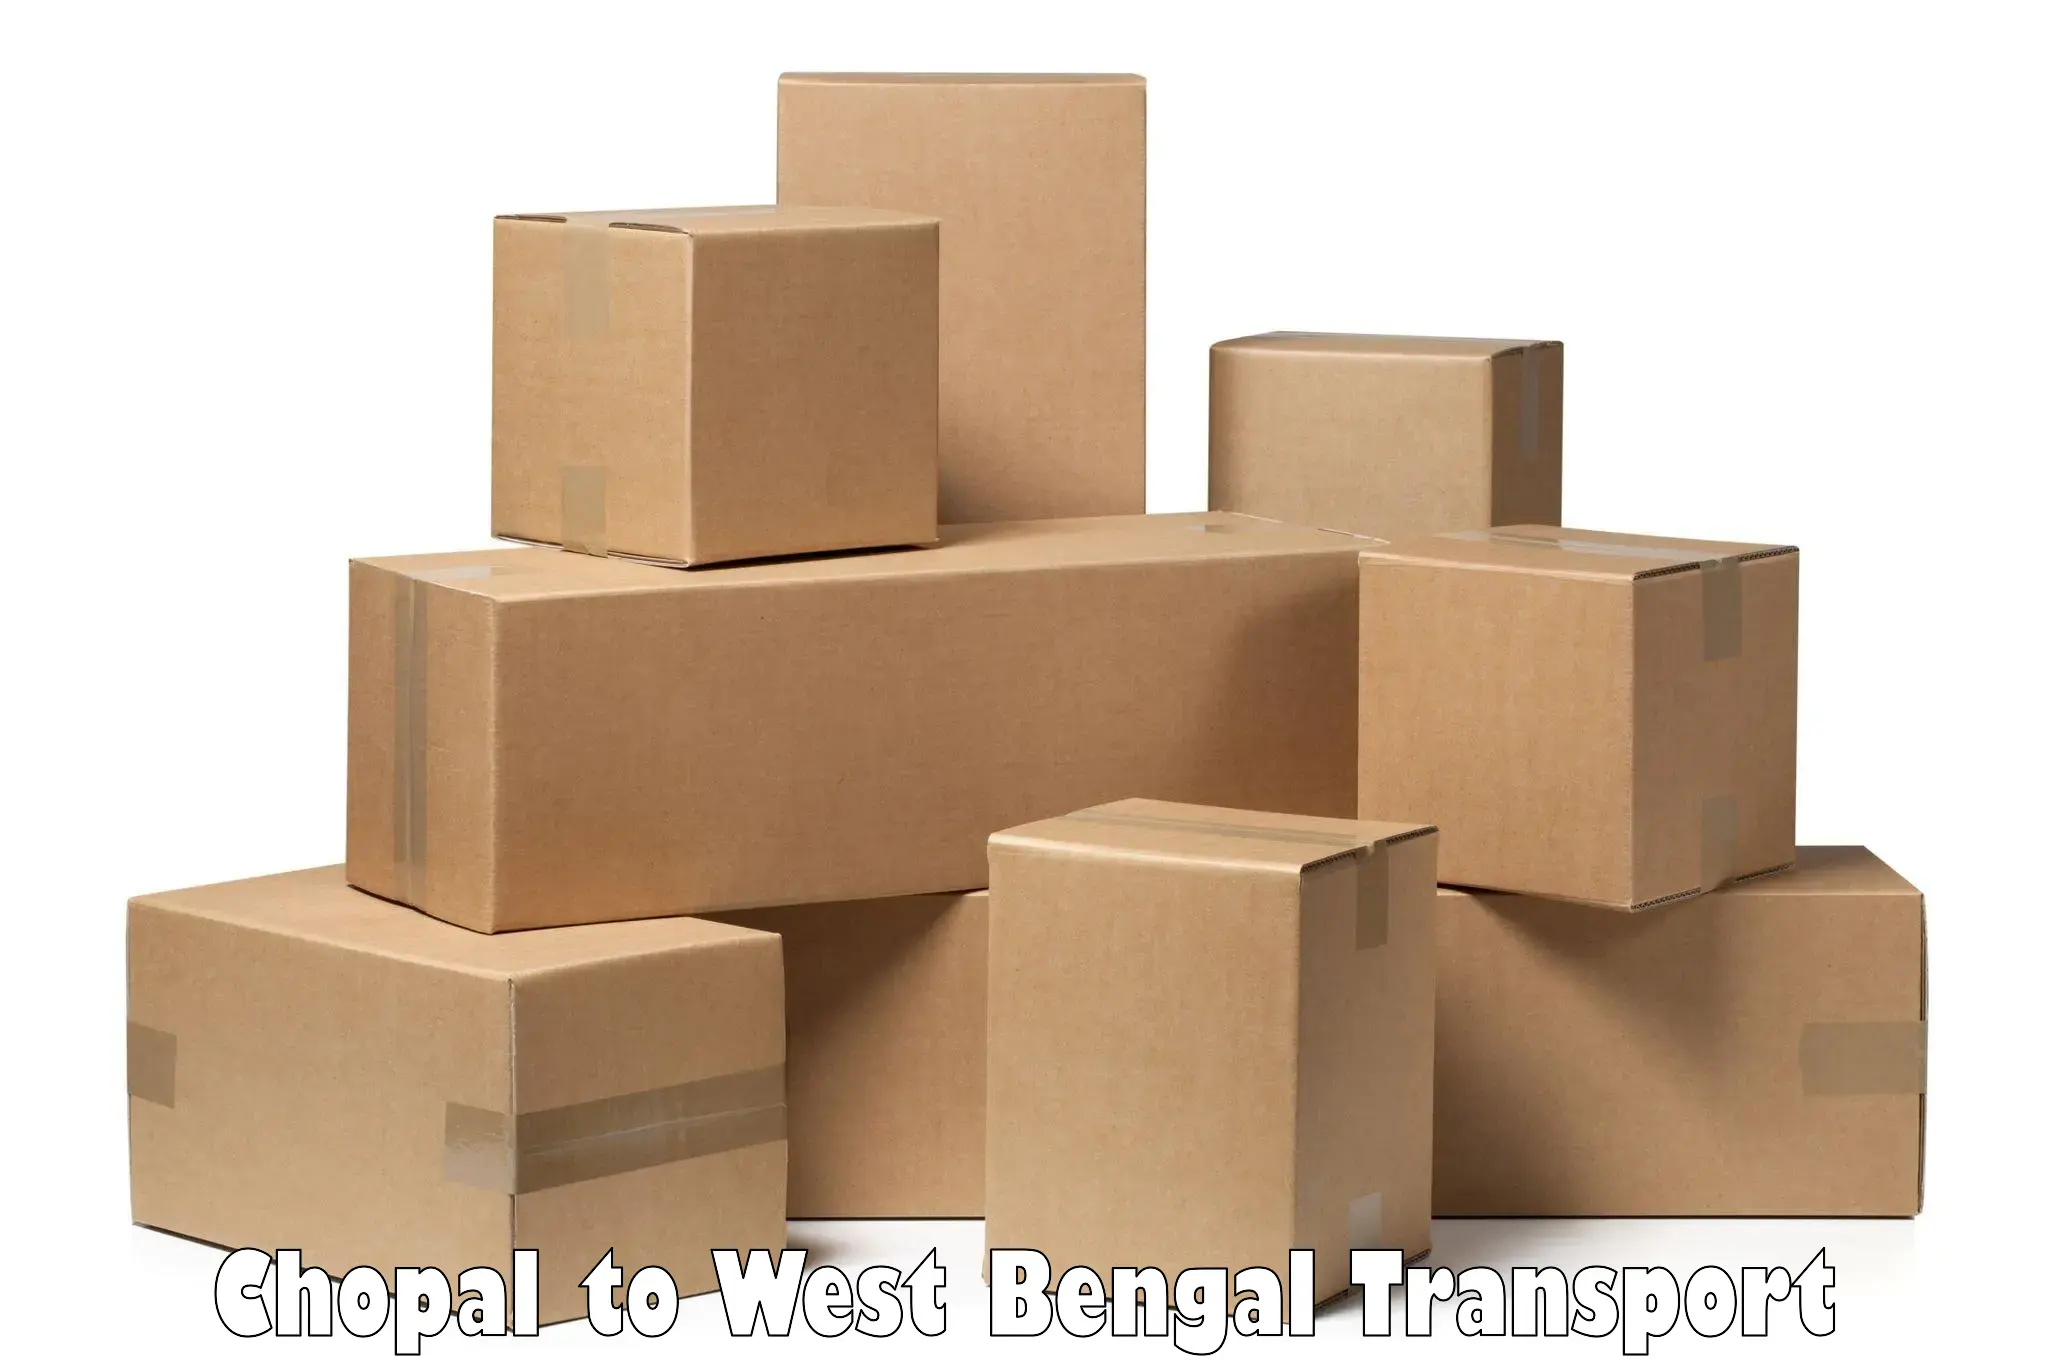 Cycle transportation service Chopal to Balurghat